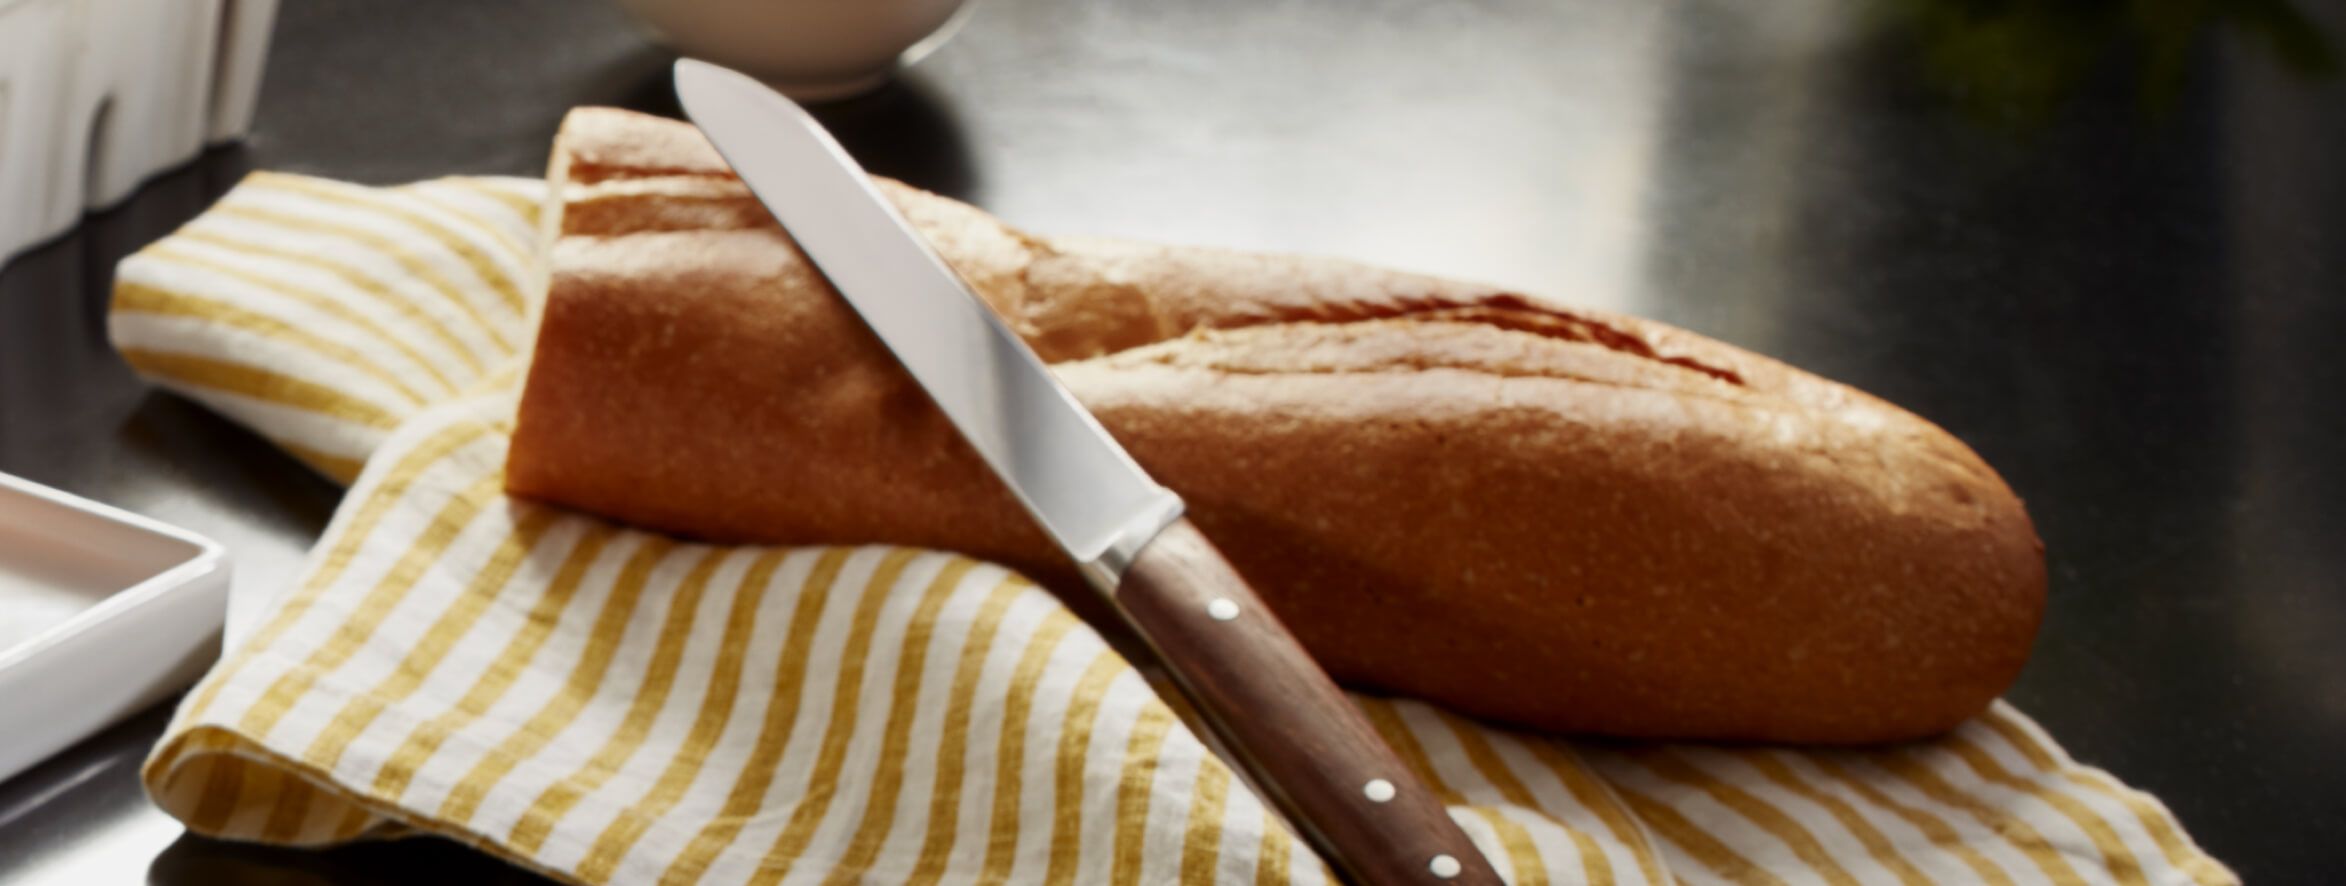 Loaf of crusty bread sitting on a yellow and white striped dish towel with a bread knife resting on top of bread.